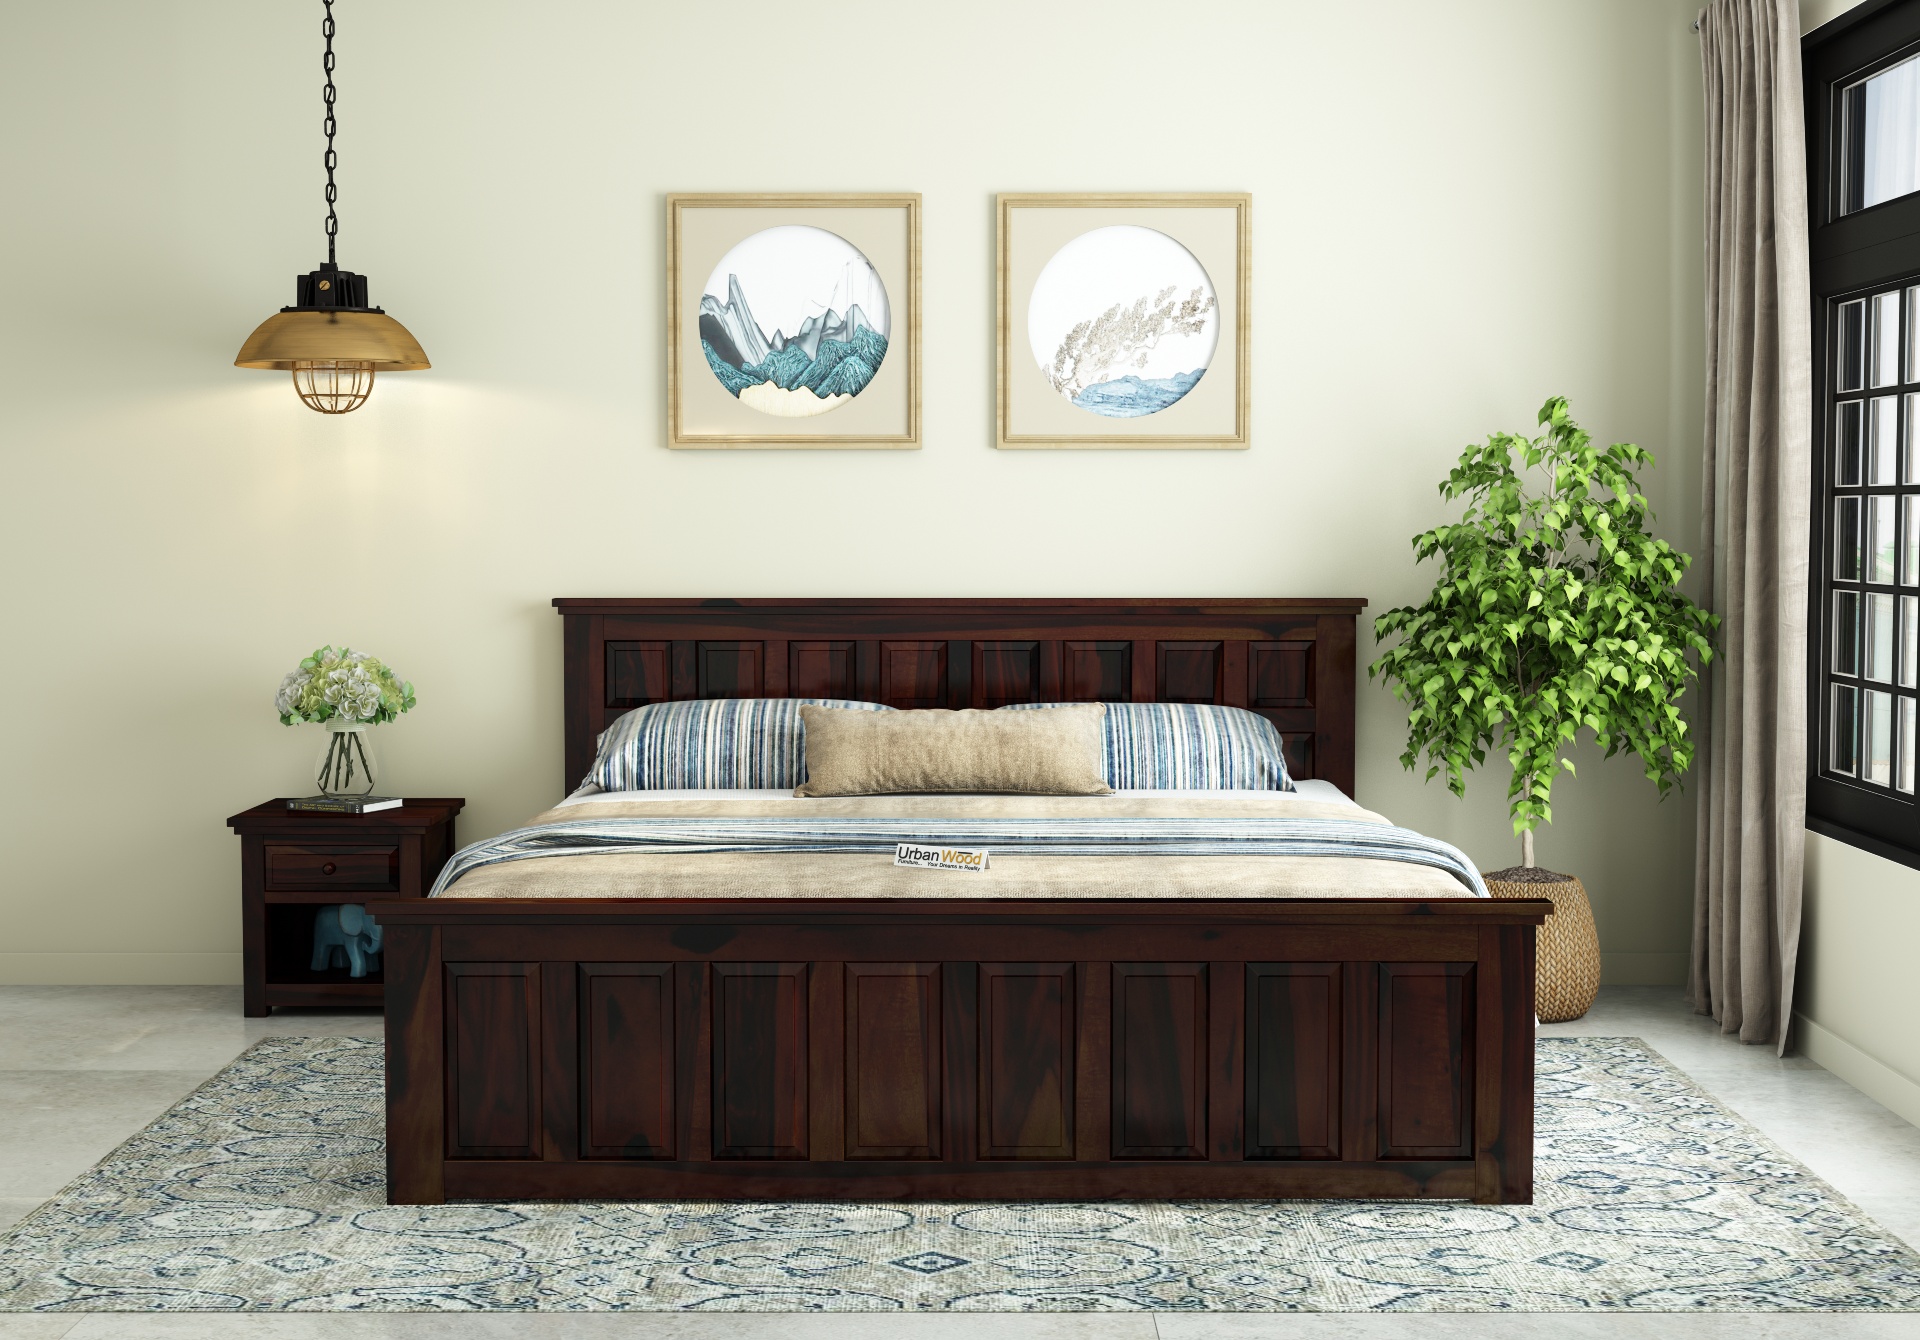 Thoms Bed With Drawer Storage ( king Size, Walnut Finish )